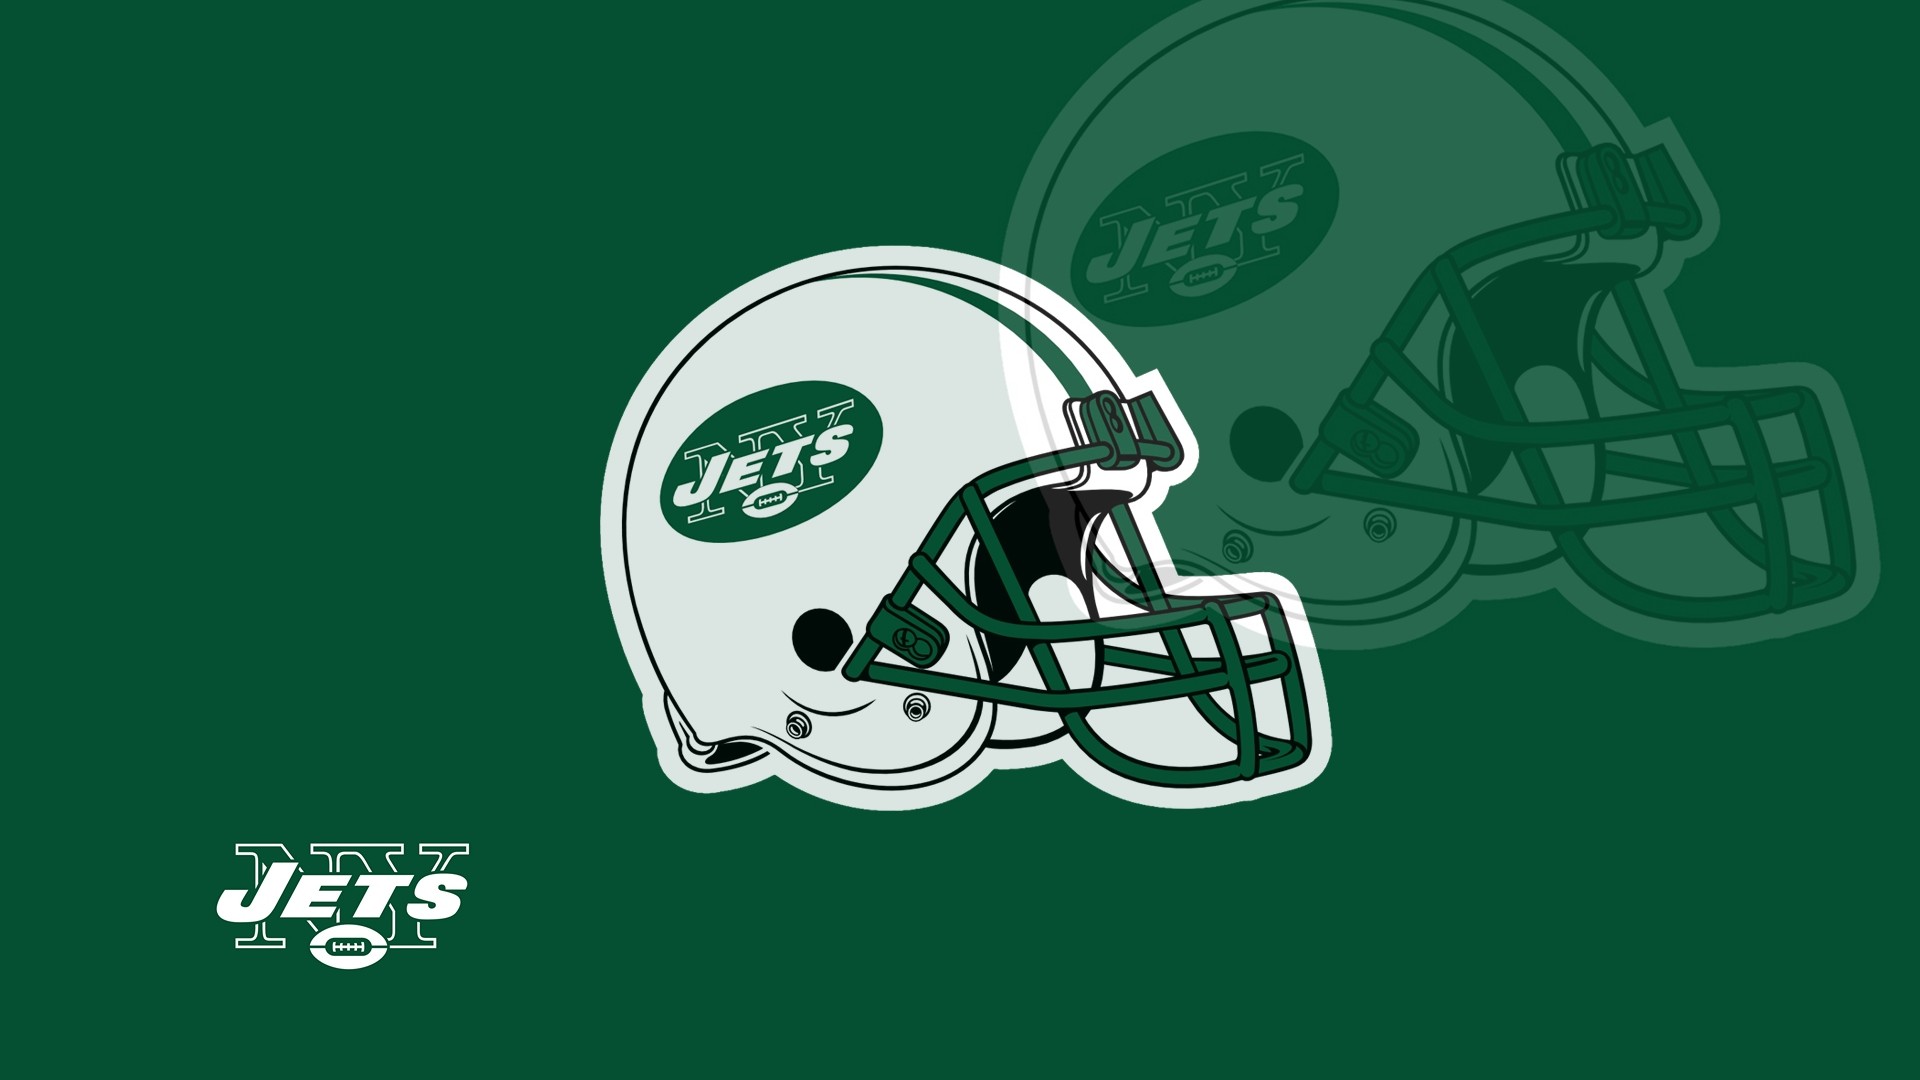 New York Jets Desktop Wallpaper With Resolution 1920X1080 pixel. You can make this wallpaper for your Mac or Windows Desktop Background, iPhone, Android or Tablet and another Smartphone device for free